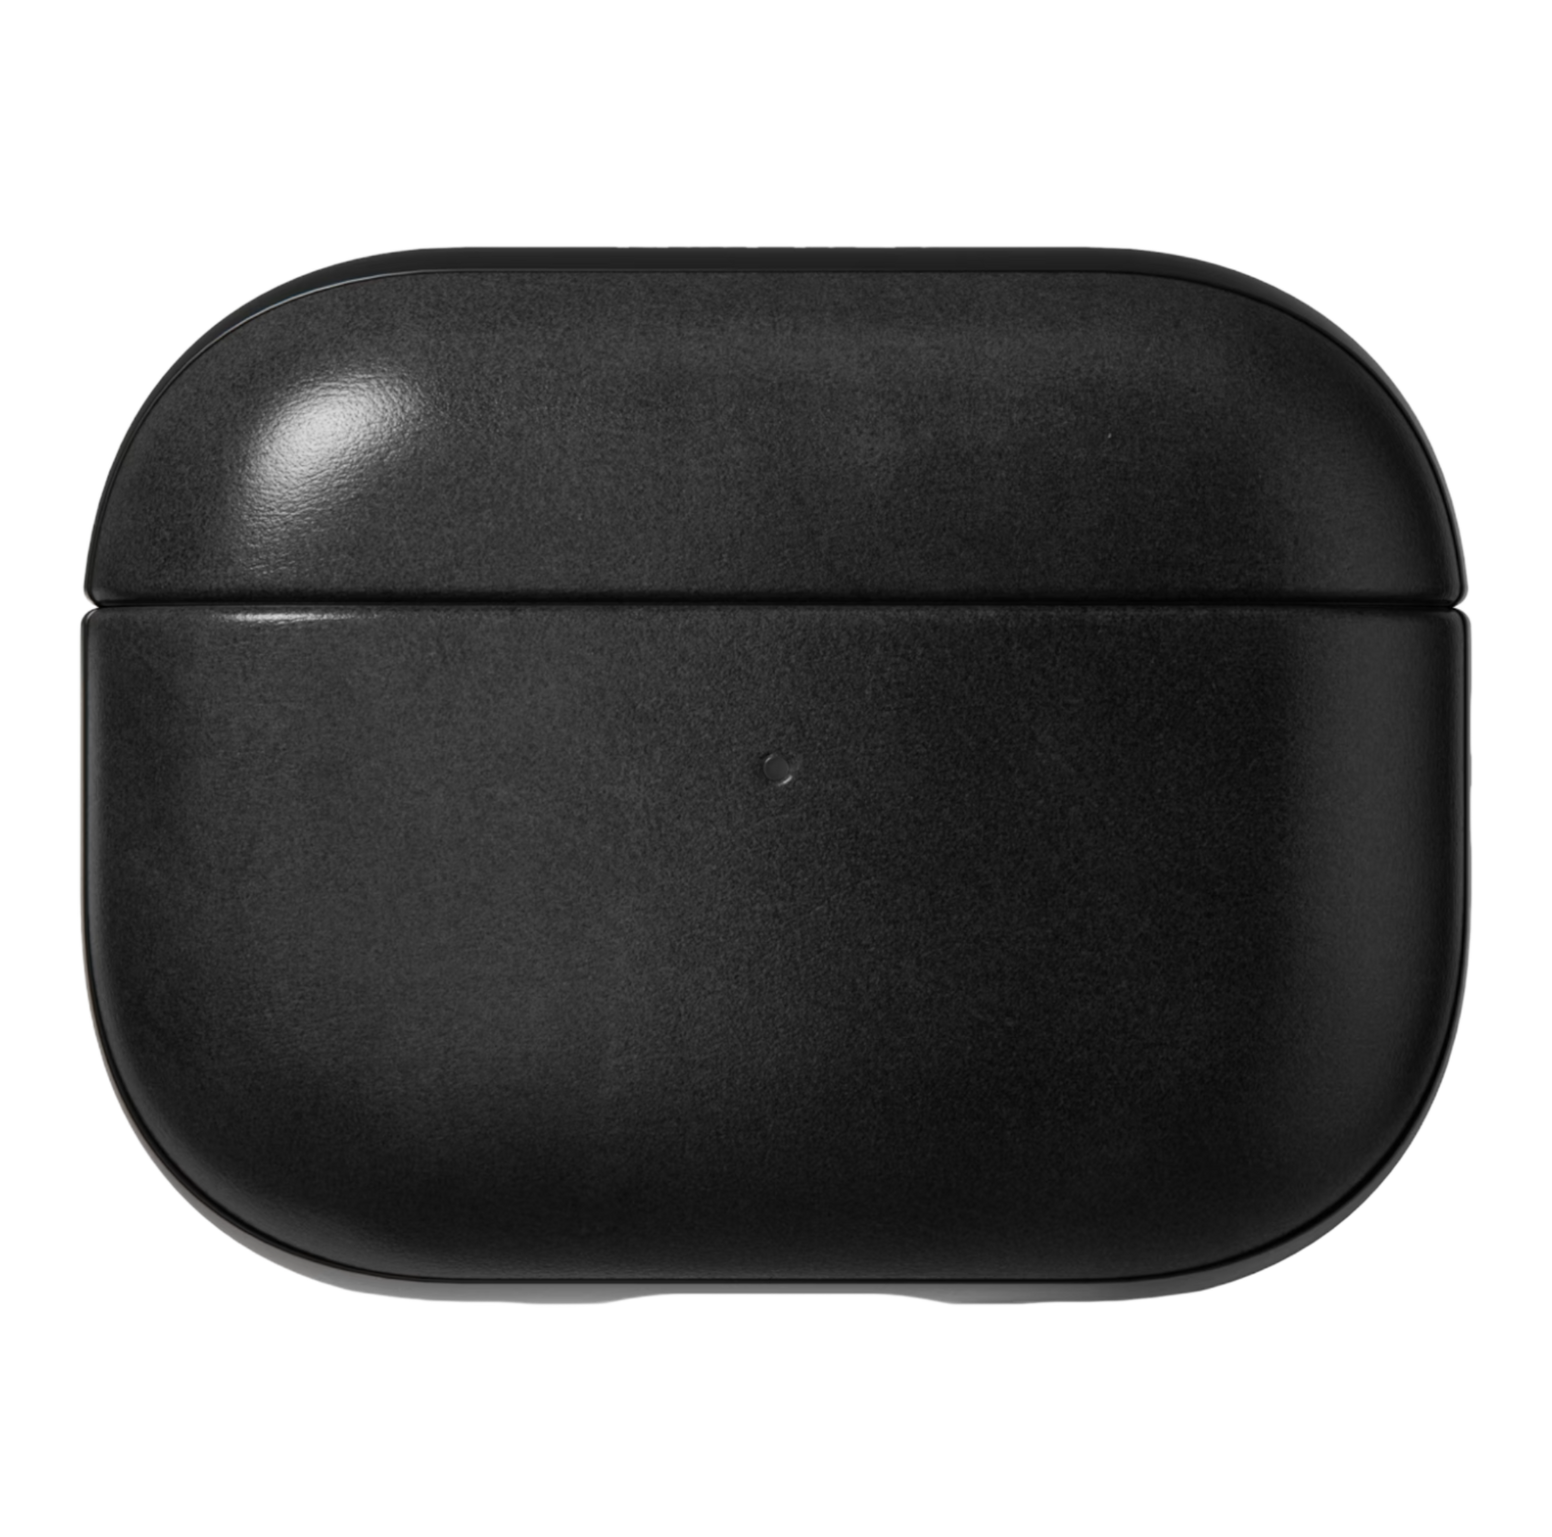 Nomad Modern Case with Horween Leather for AirPods Pro (2nd Gen) - Black